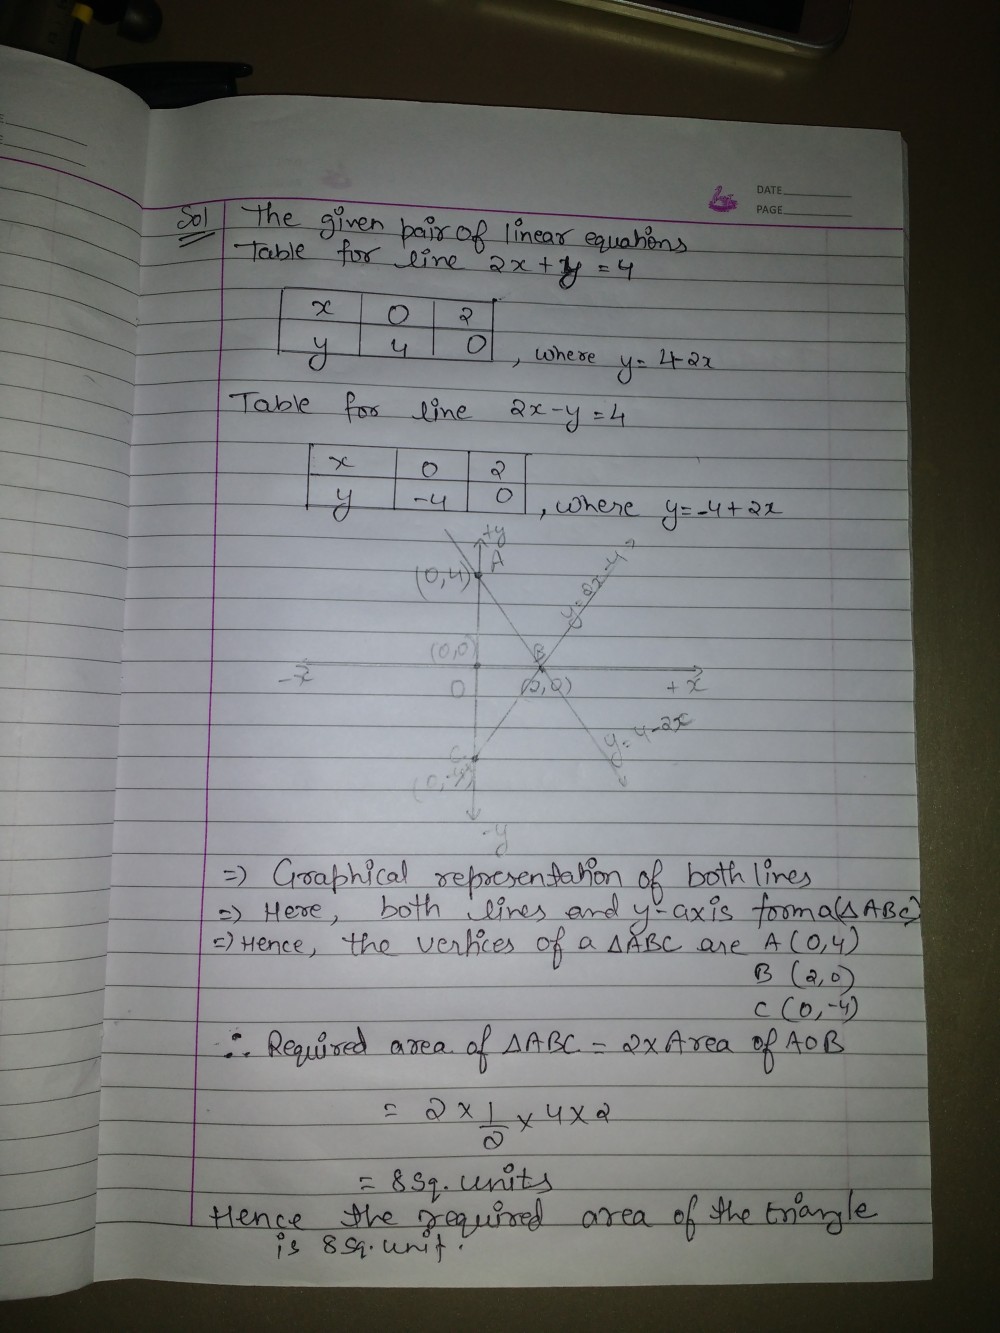 Draw The Graph Of The Pair Of Equations 2x Y 4 And 2x Y 4 Write The Vertices Of The Triangle Formed By These Lines And The Y Axis Find The Area Of This Triangle